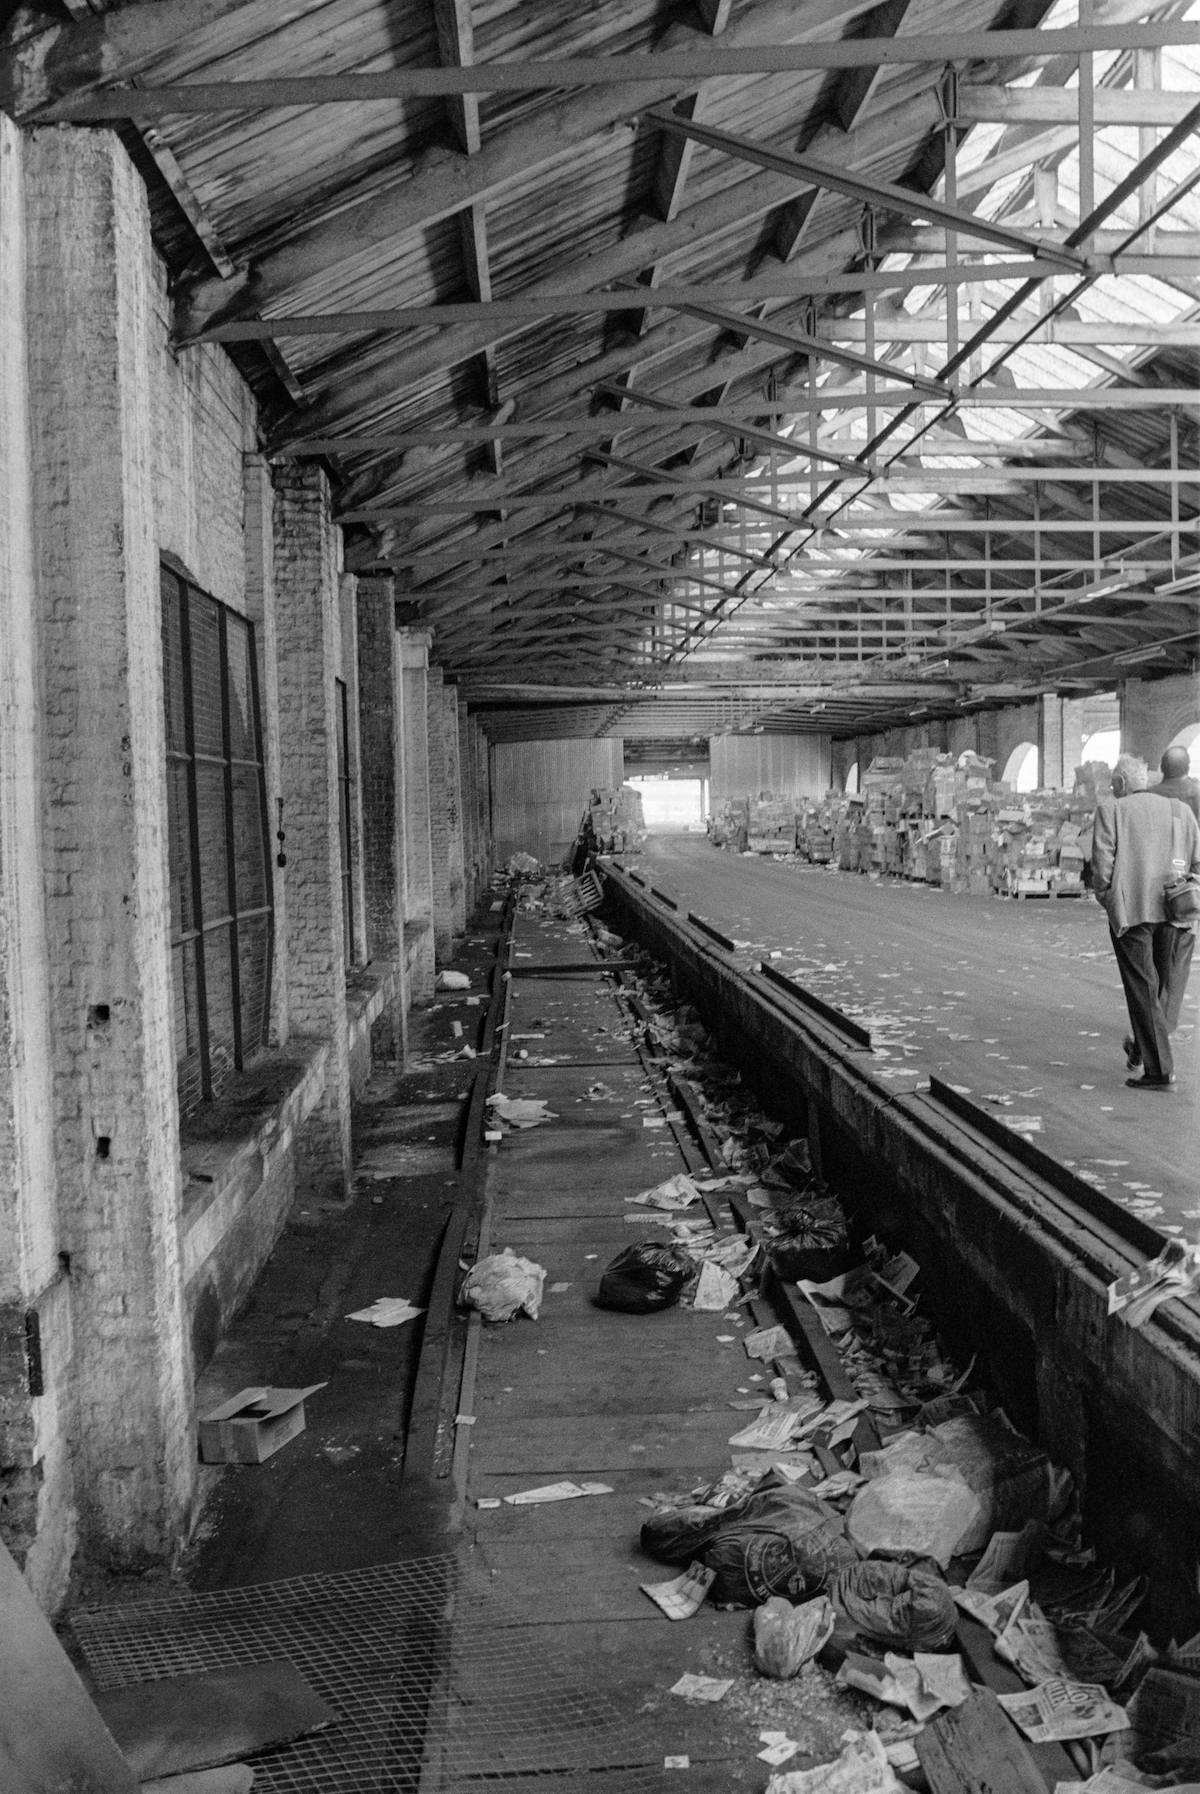 Western Goods Shed, Kings X Goods Yard, 1989